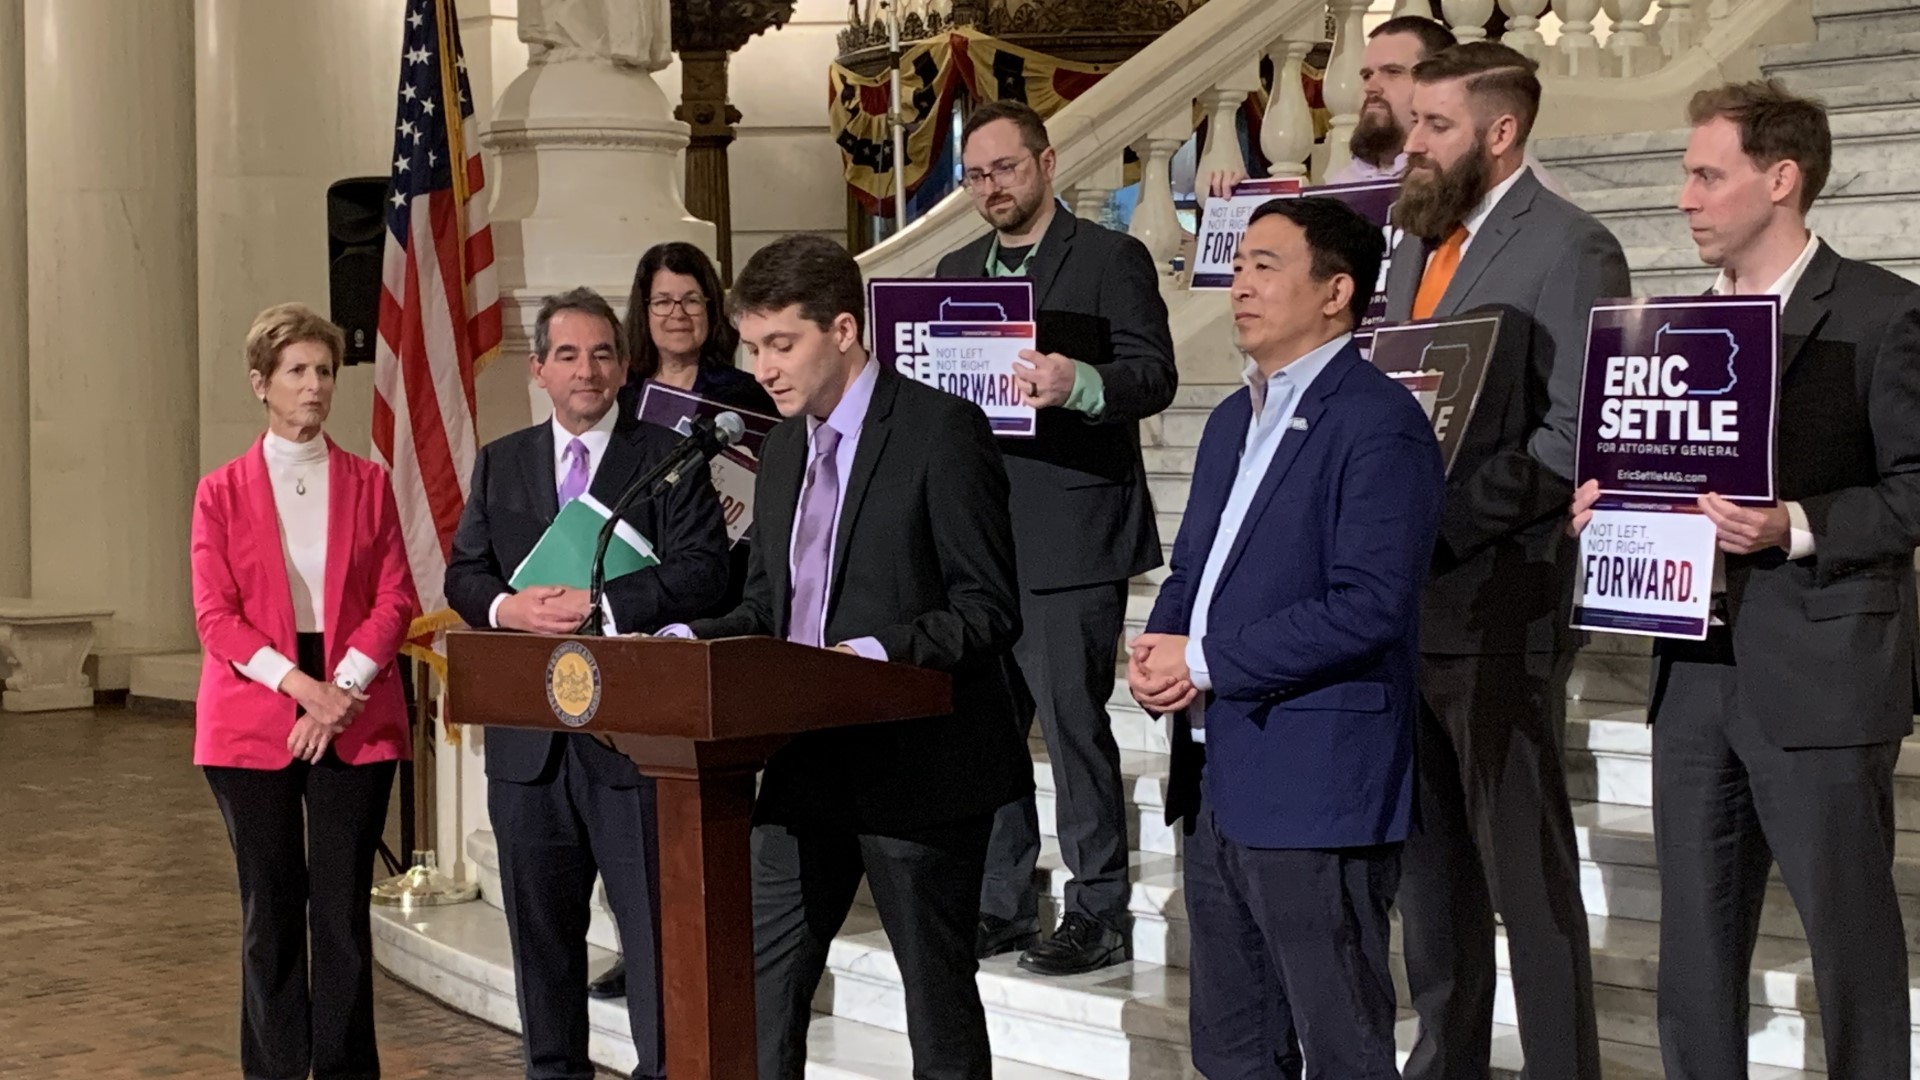 Former 2020 presidential candidate Andrew Yang came to Harrisburg to help launch third-party campaigns for two men running for Attorney General and State Treasurer.